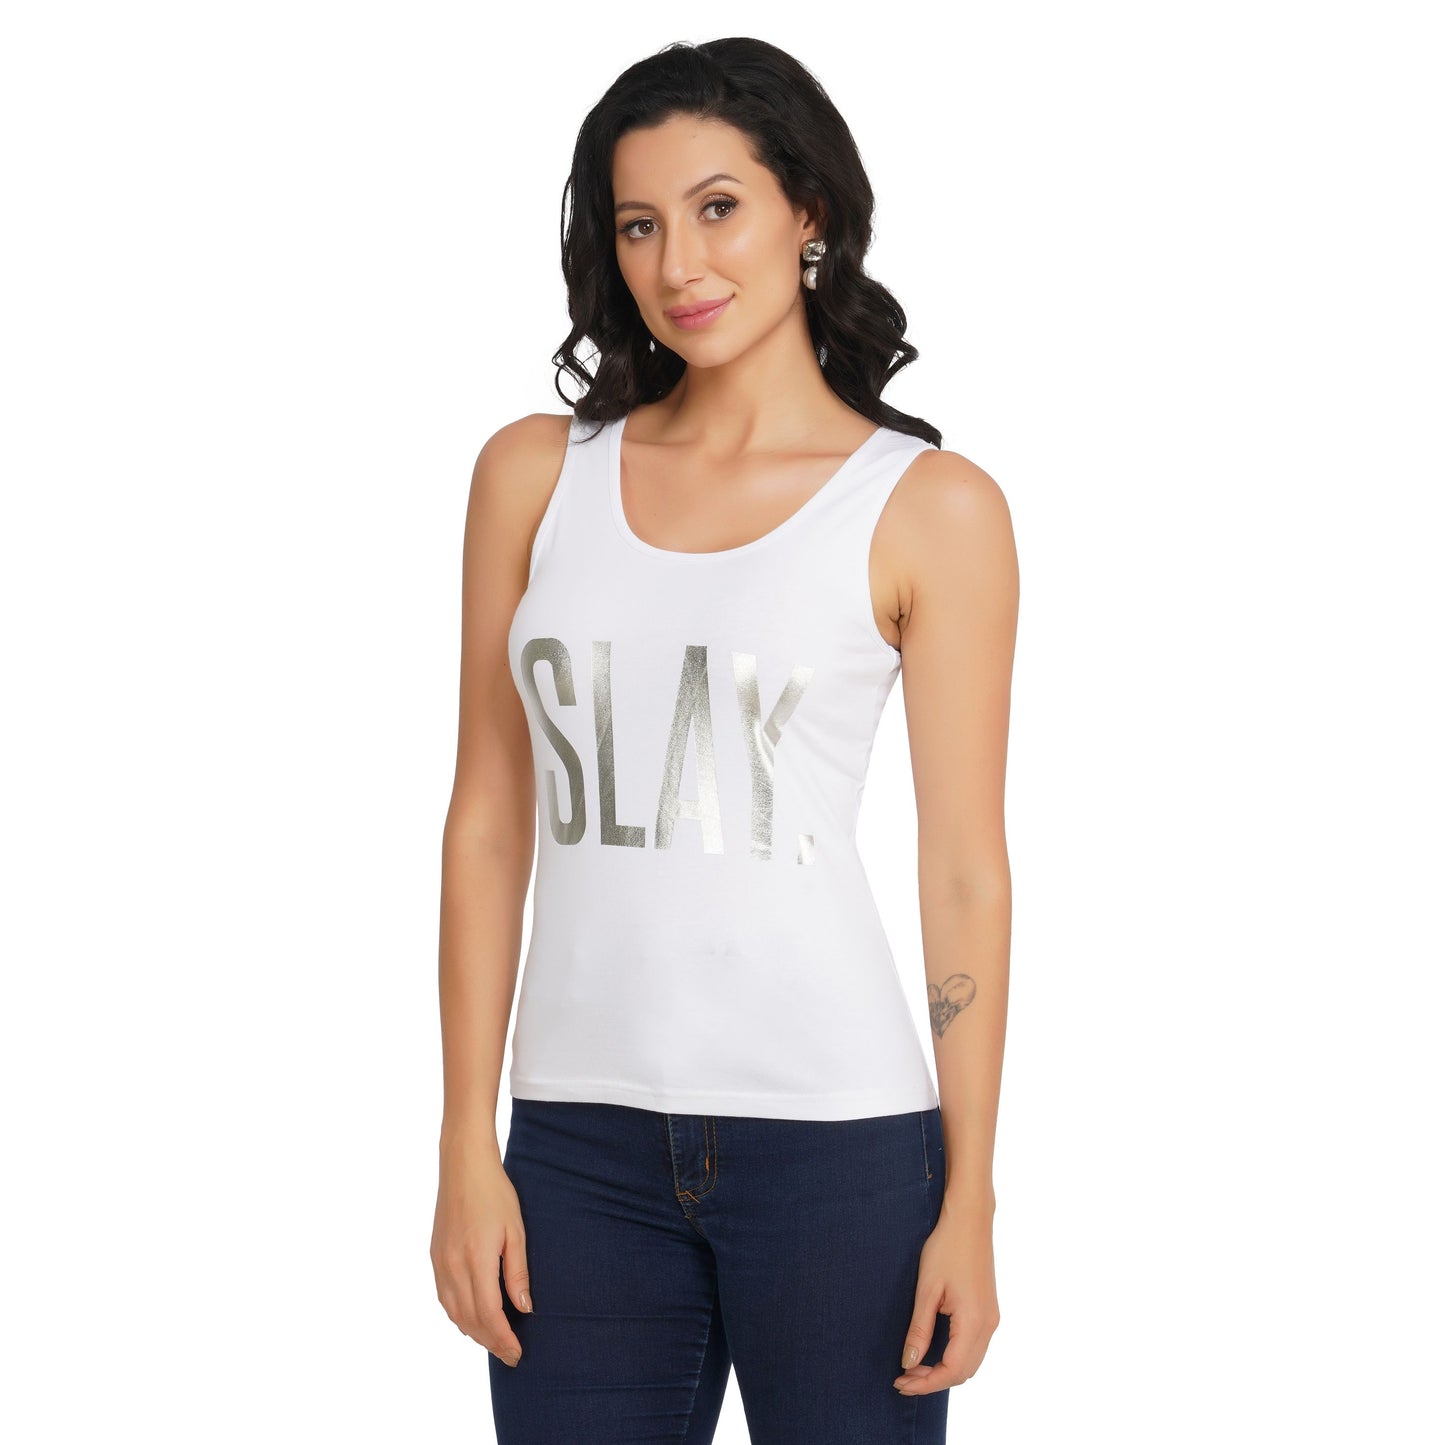 SLAY. Women's Limited Edition Silver Foil Printed Tank Top - Matte Finish-clothing-to-slay.myshopify.com-Tank Top